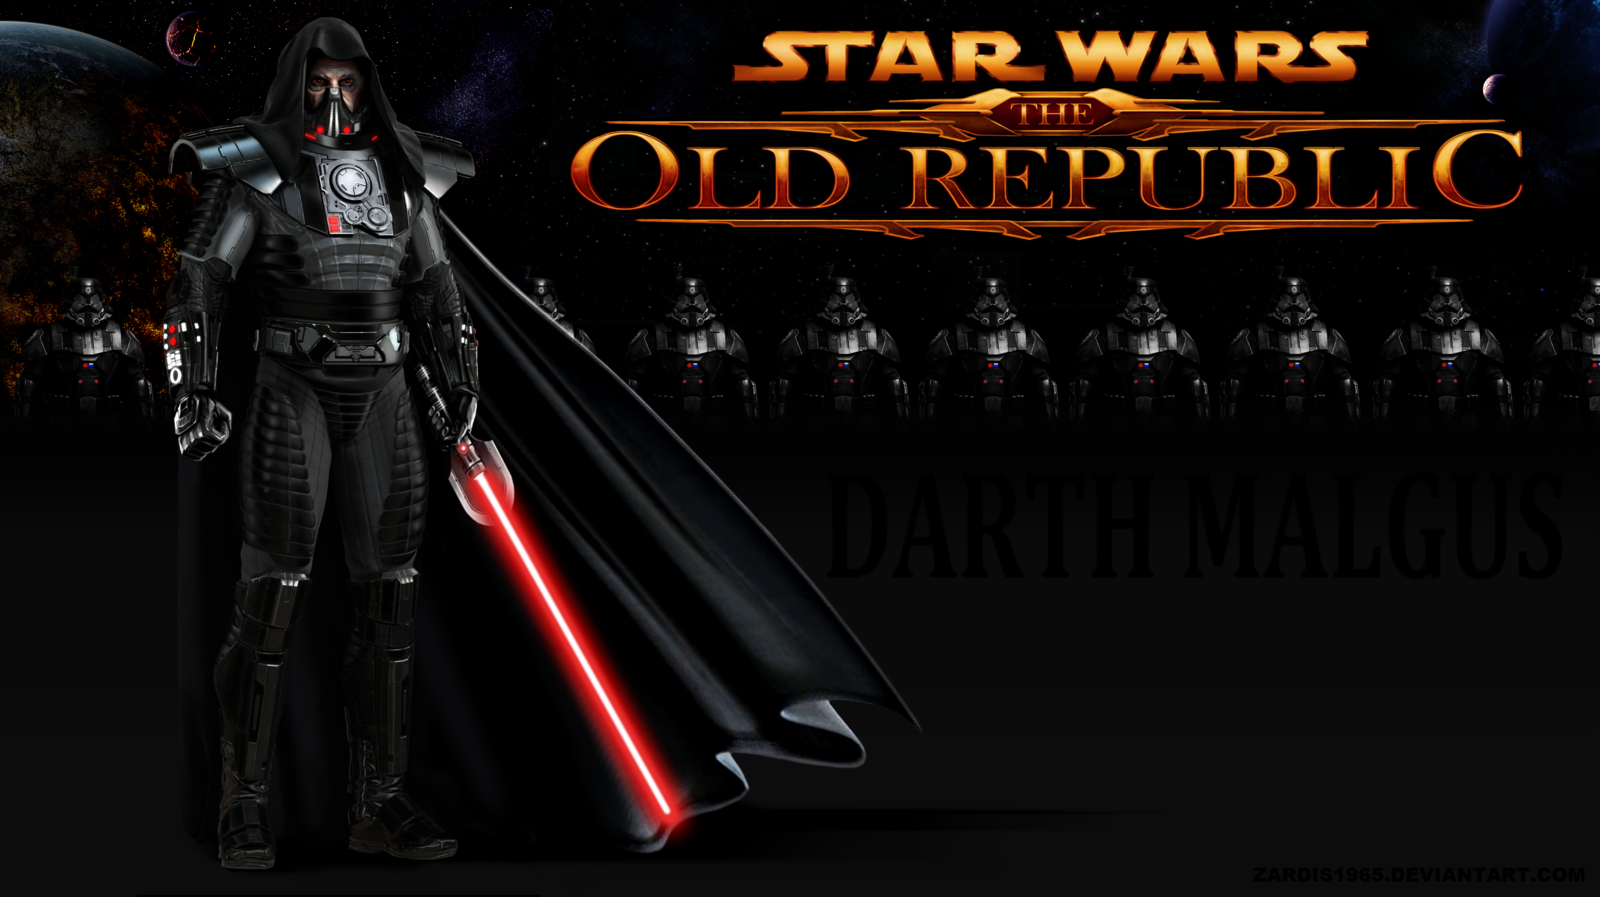 Free download images for darth malgus wallpaper x for your desktop mobile tablet explore darth malgus wallpaper darth vader background darth maul wallpaper darth vader wallpaper